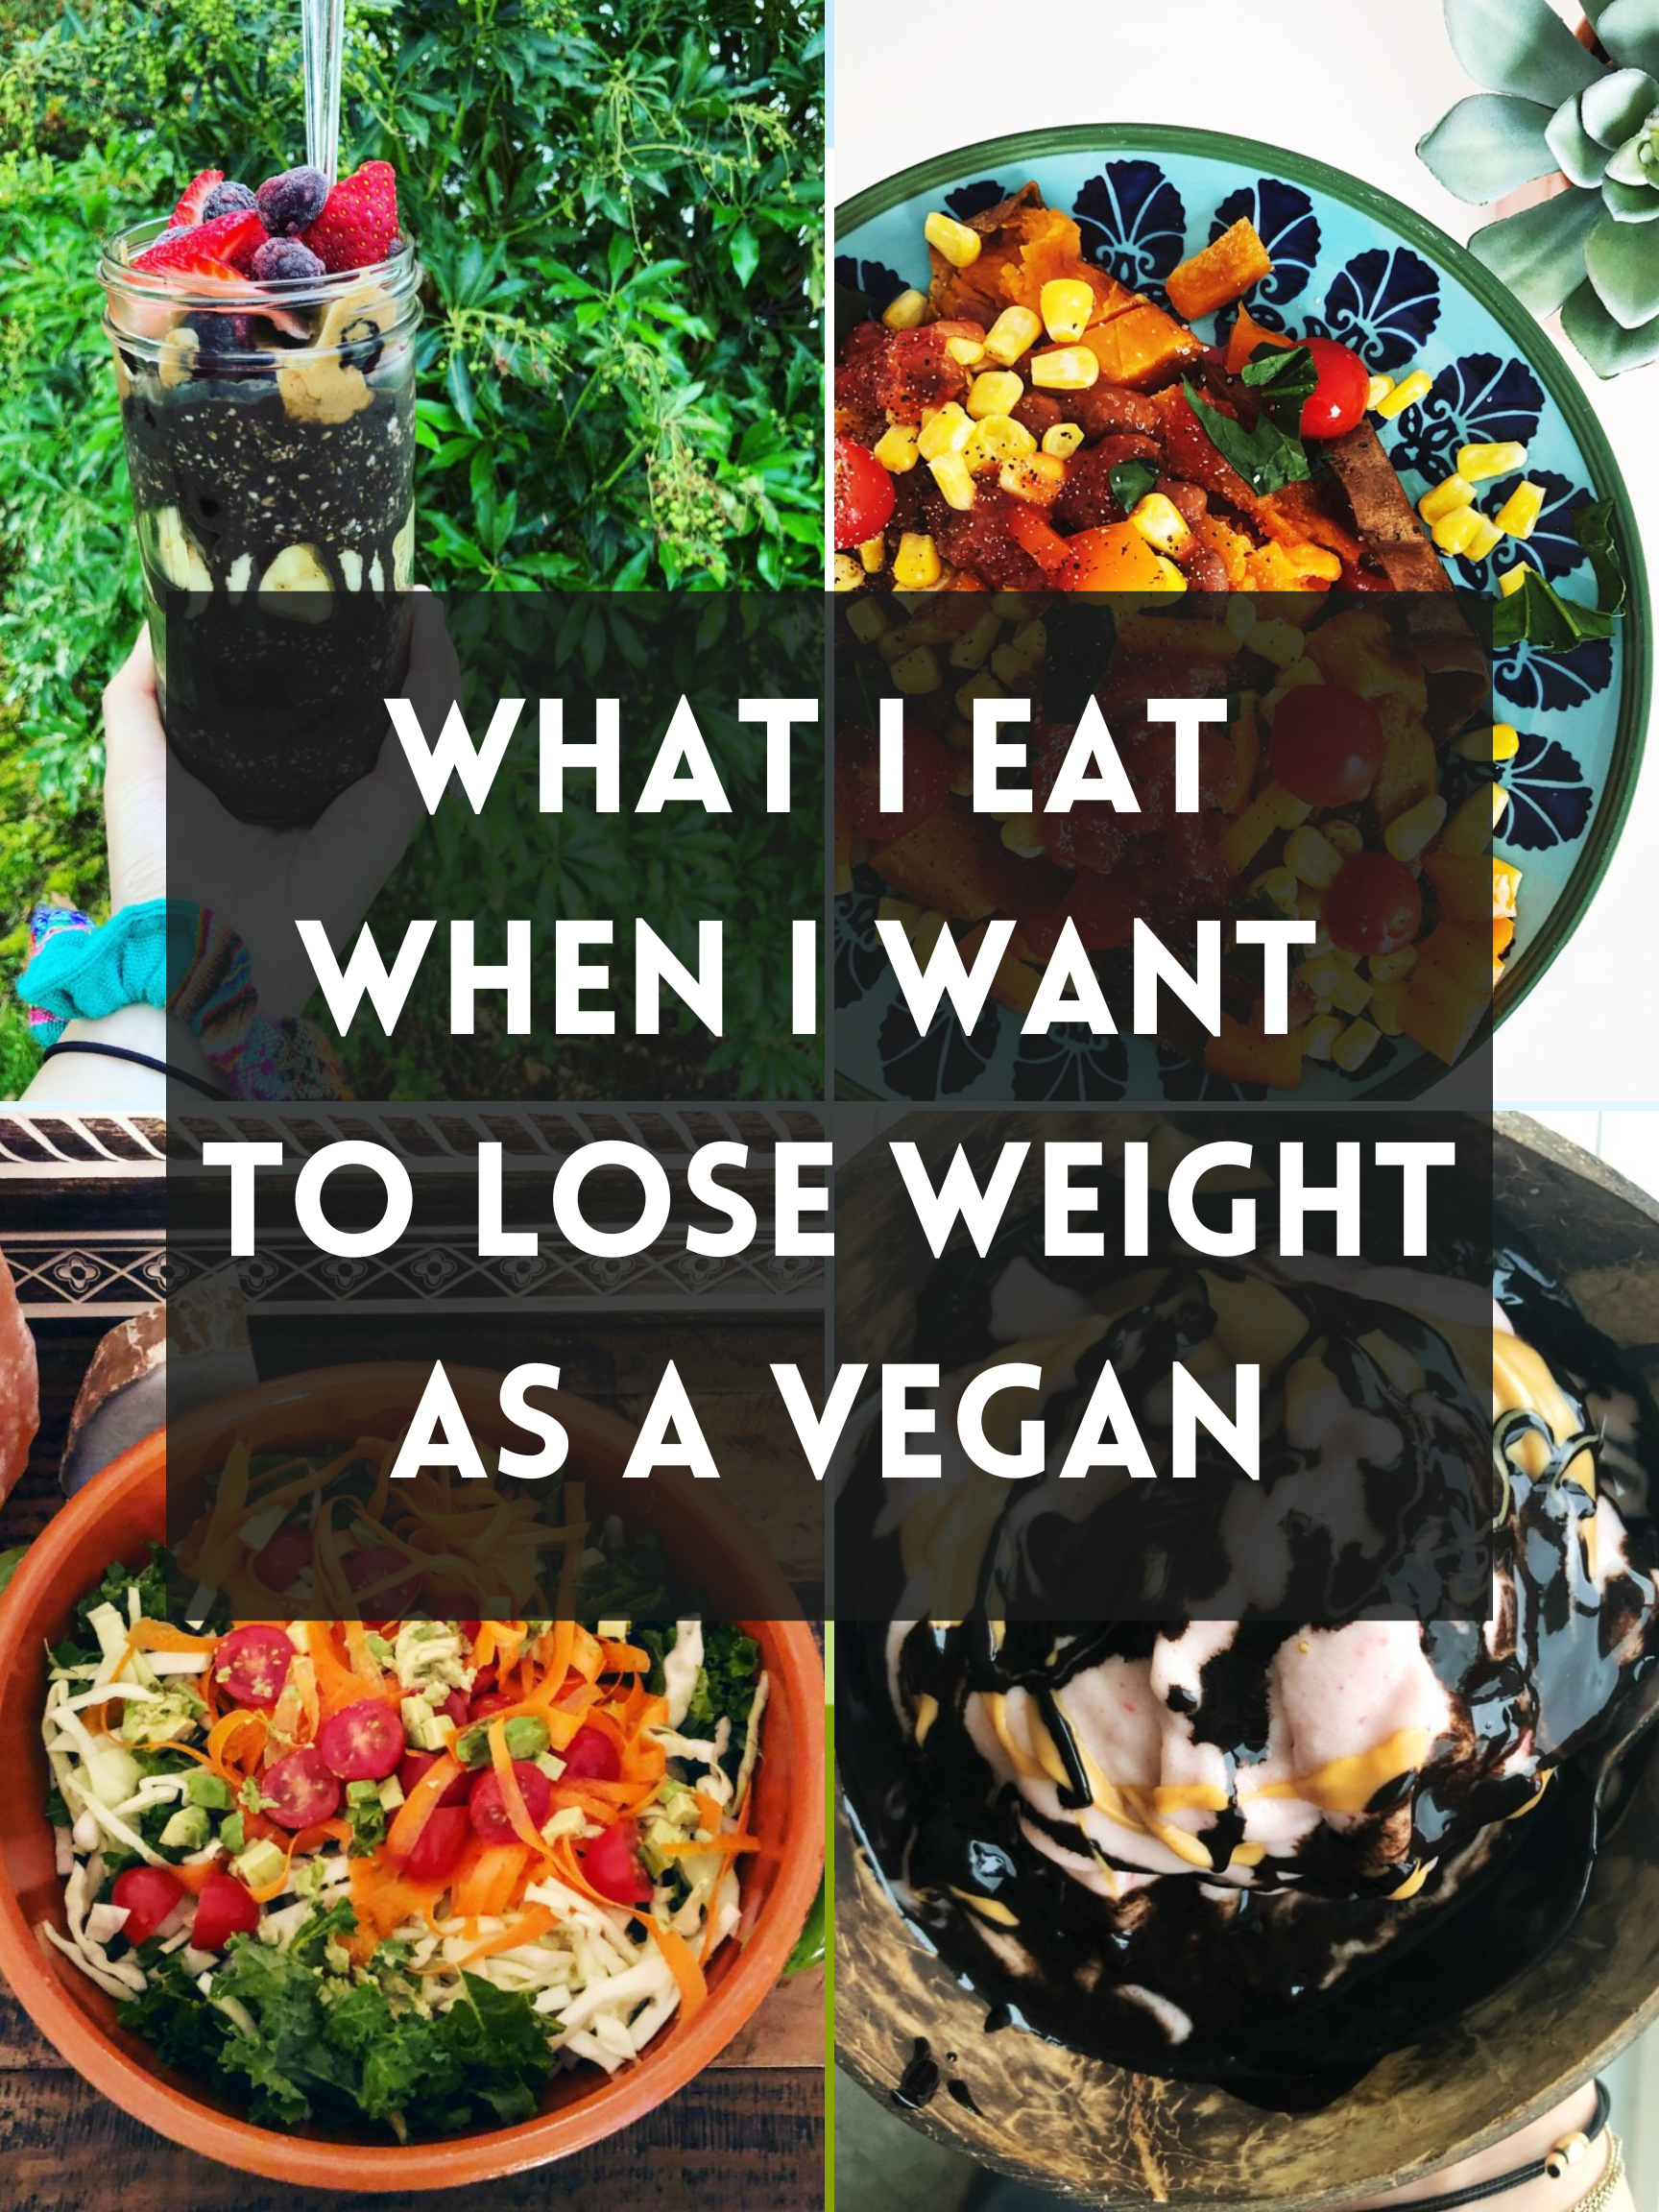 What I Eat When I Want to Lose Weight as a Vegan